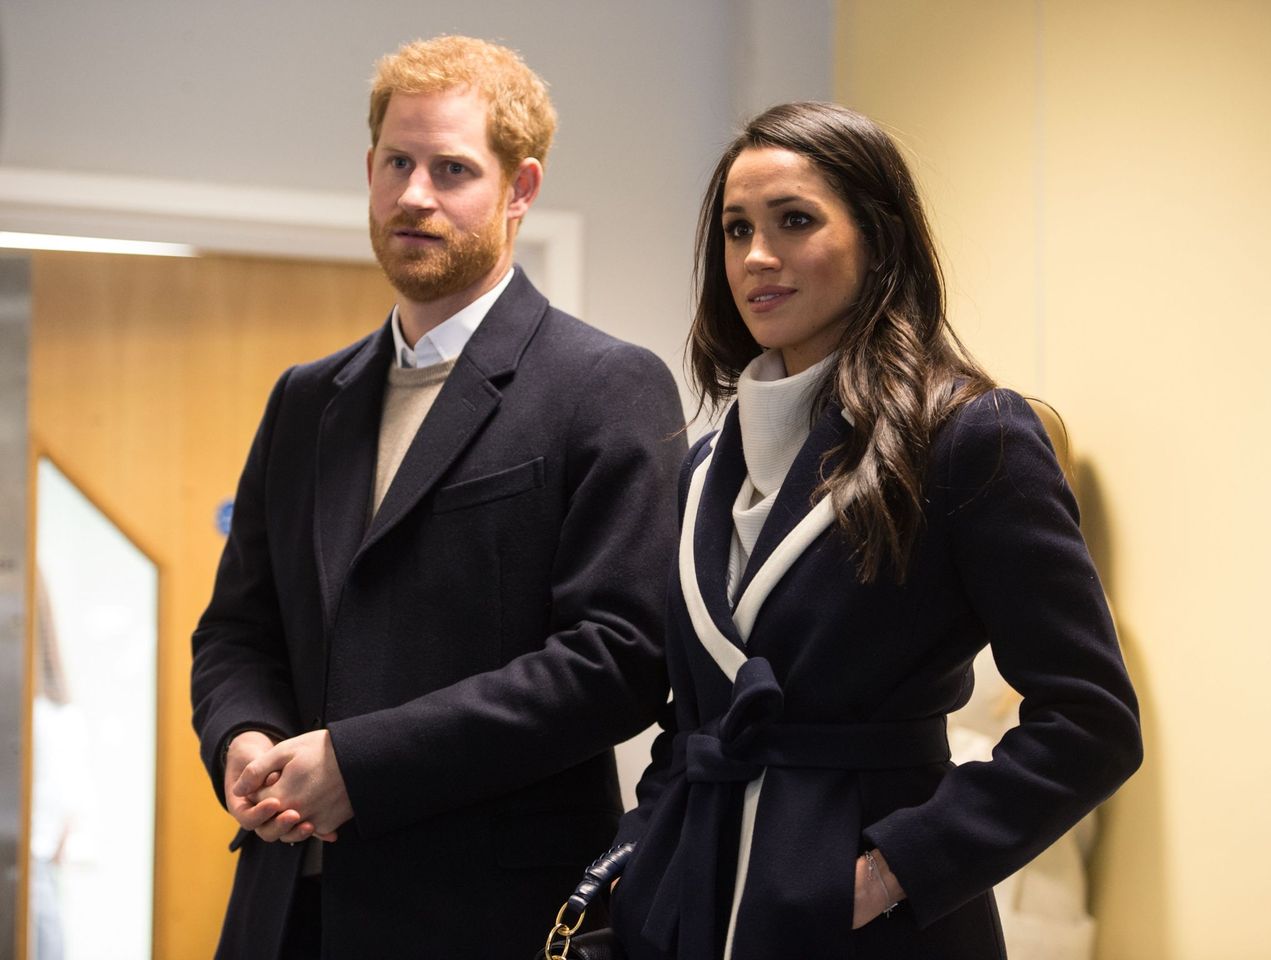 Britain's Prince Harry and his wife Meghan Markle visit Nechells Wellbeing Centre in Birmingham, central England on March 8, 2018. | Photo: Getty Images